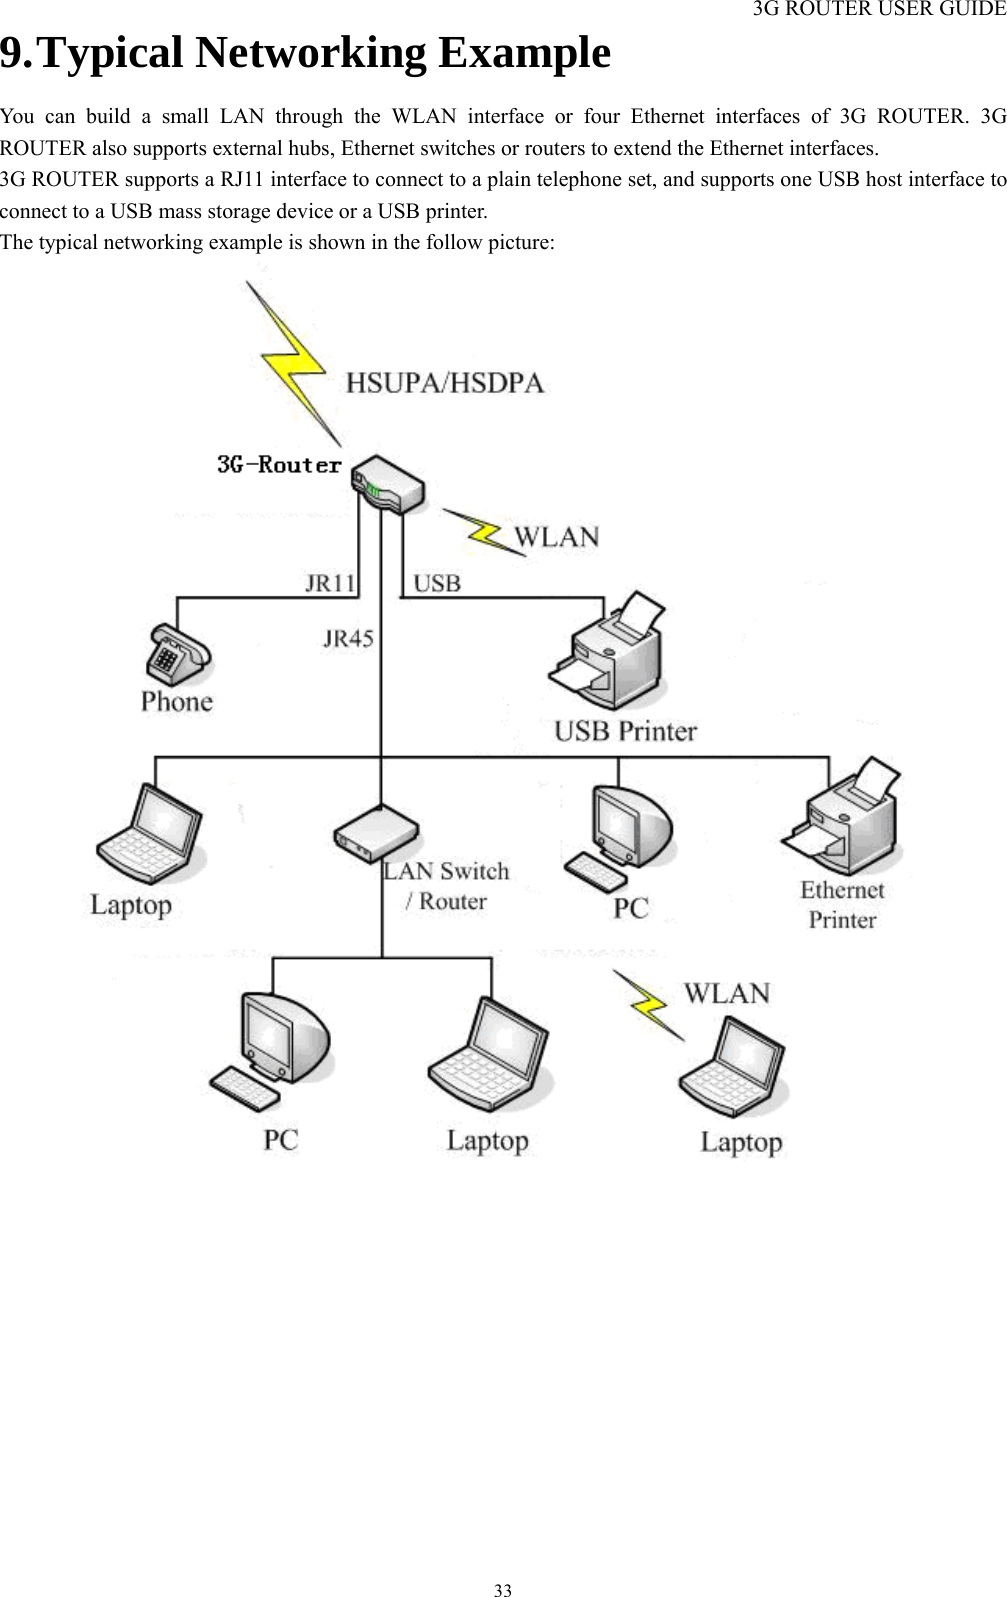 3G ROUTER USER GUIDE  339. Typical Networking Example You can build a small LAN through the WLAN interface or four Ethernet interfaces of 3G ROUTER. 3G ROUTER also supports external hubs, Ethernet switches or routers to extend the Ethernet interfaces. 3G ROUTER supports a RJ11 interface to connect to a plain telephone set, and supports one USB host interface to connect to a USB mass storage device or a USB printer. The typical networking example is shown in the follow picture:   